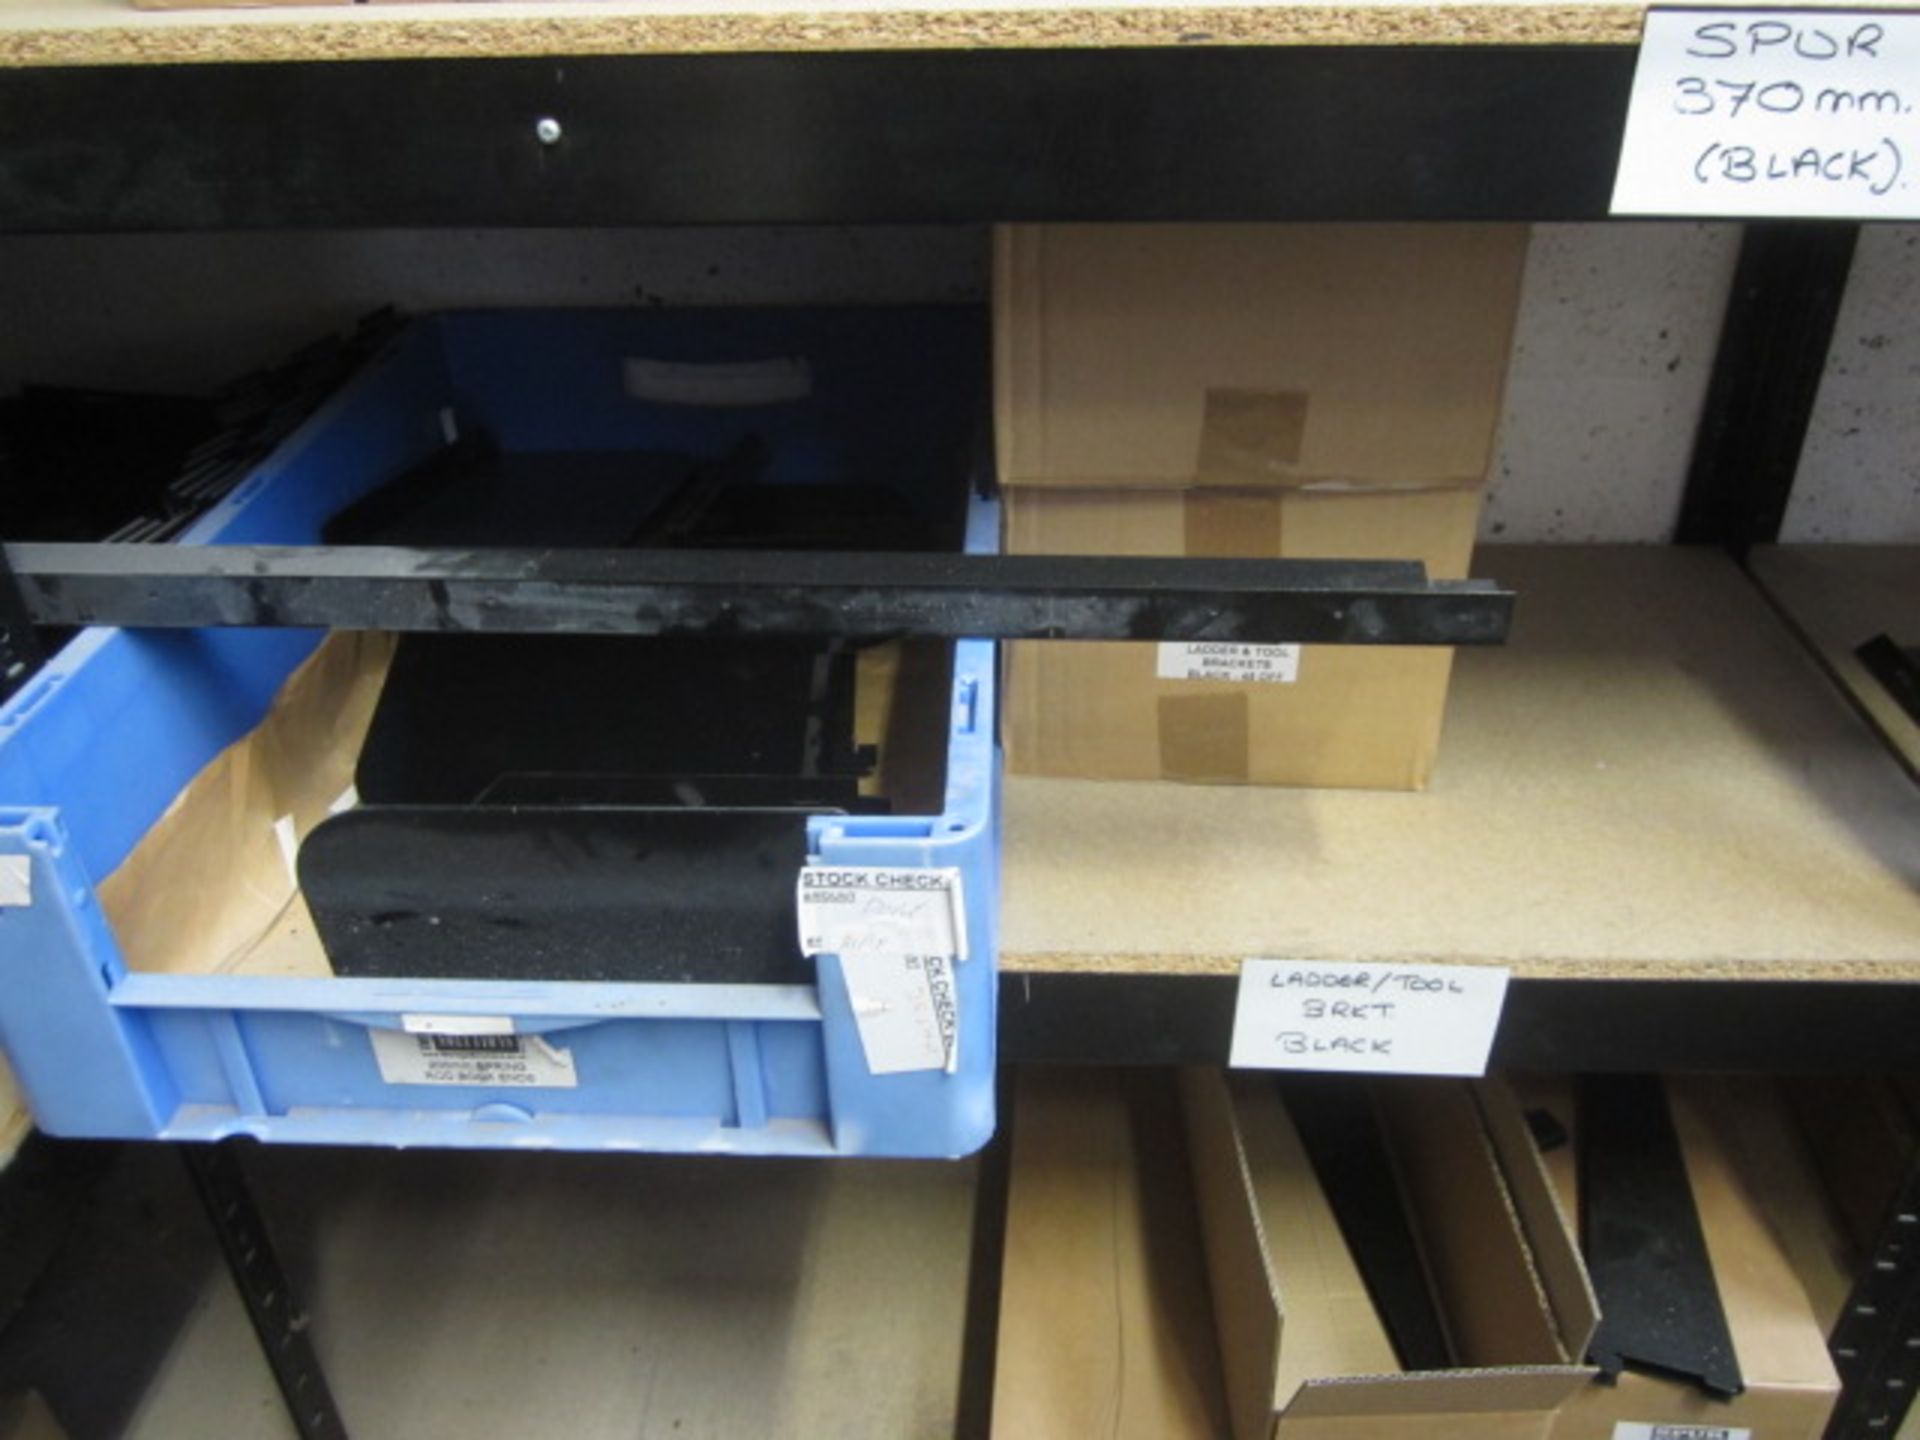 Contents of two bays of racking to include Spur uprights 710mm, 1000mm, Spur Steel-Lok black/ - Image 6 of 16